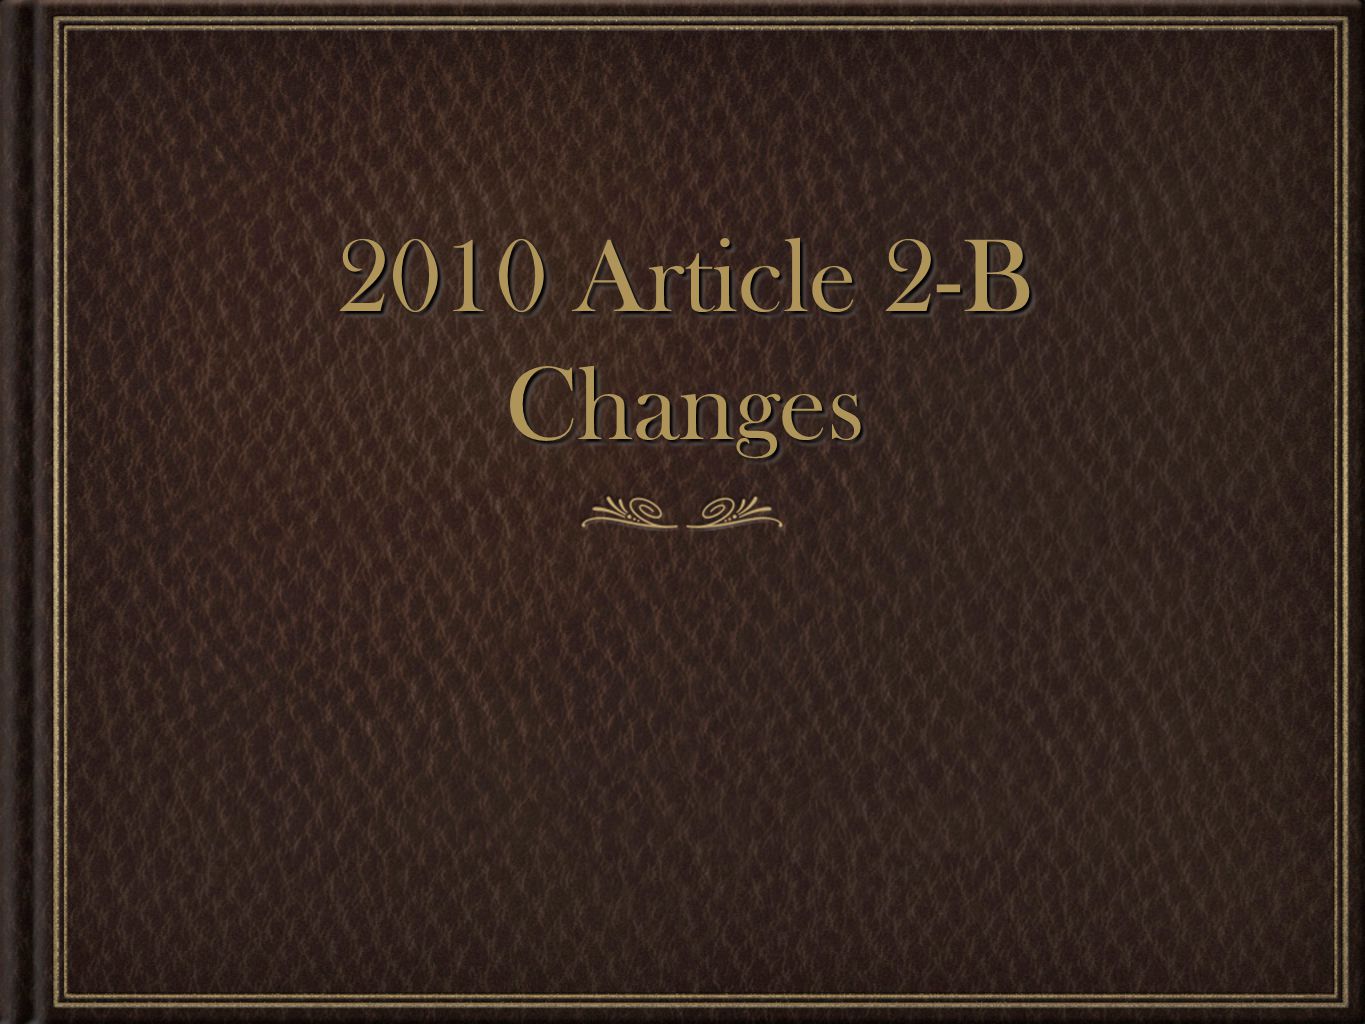 2010 Article 2-B Changes